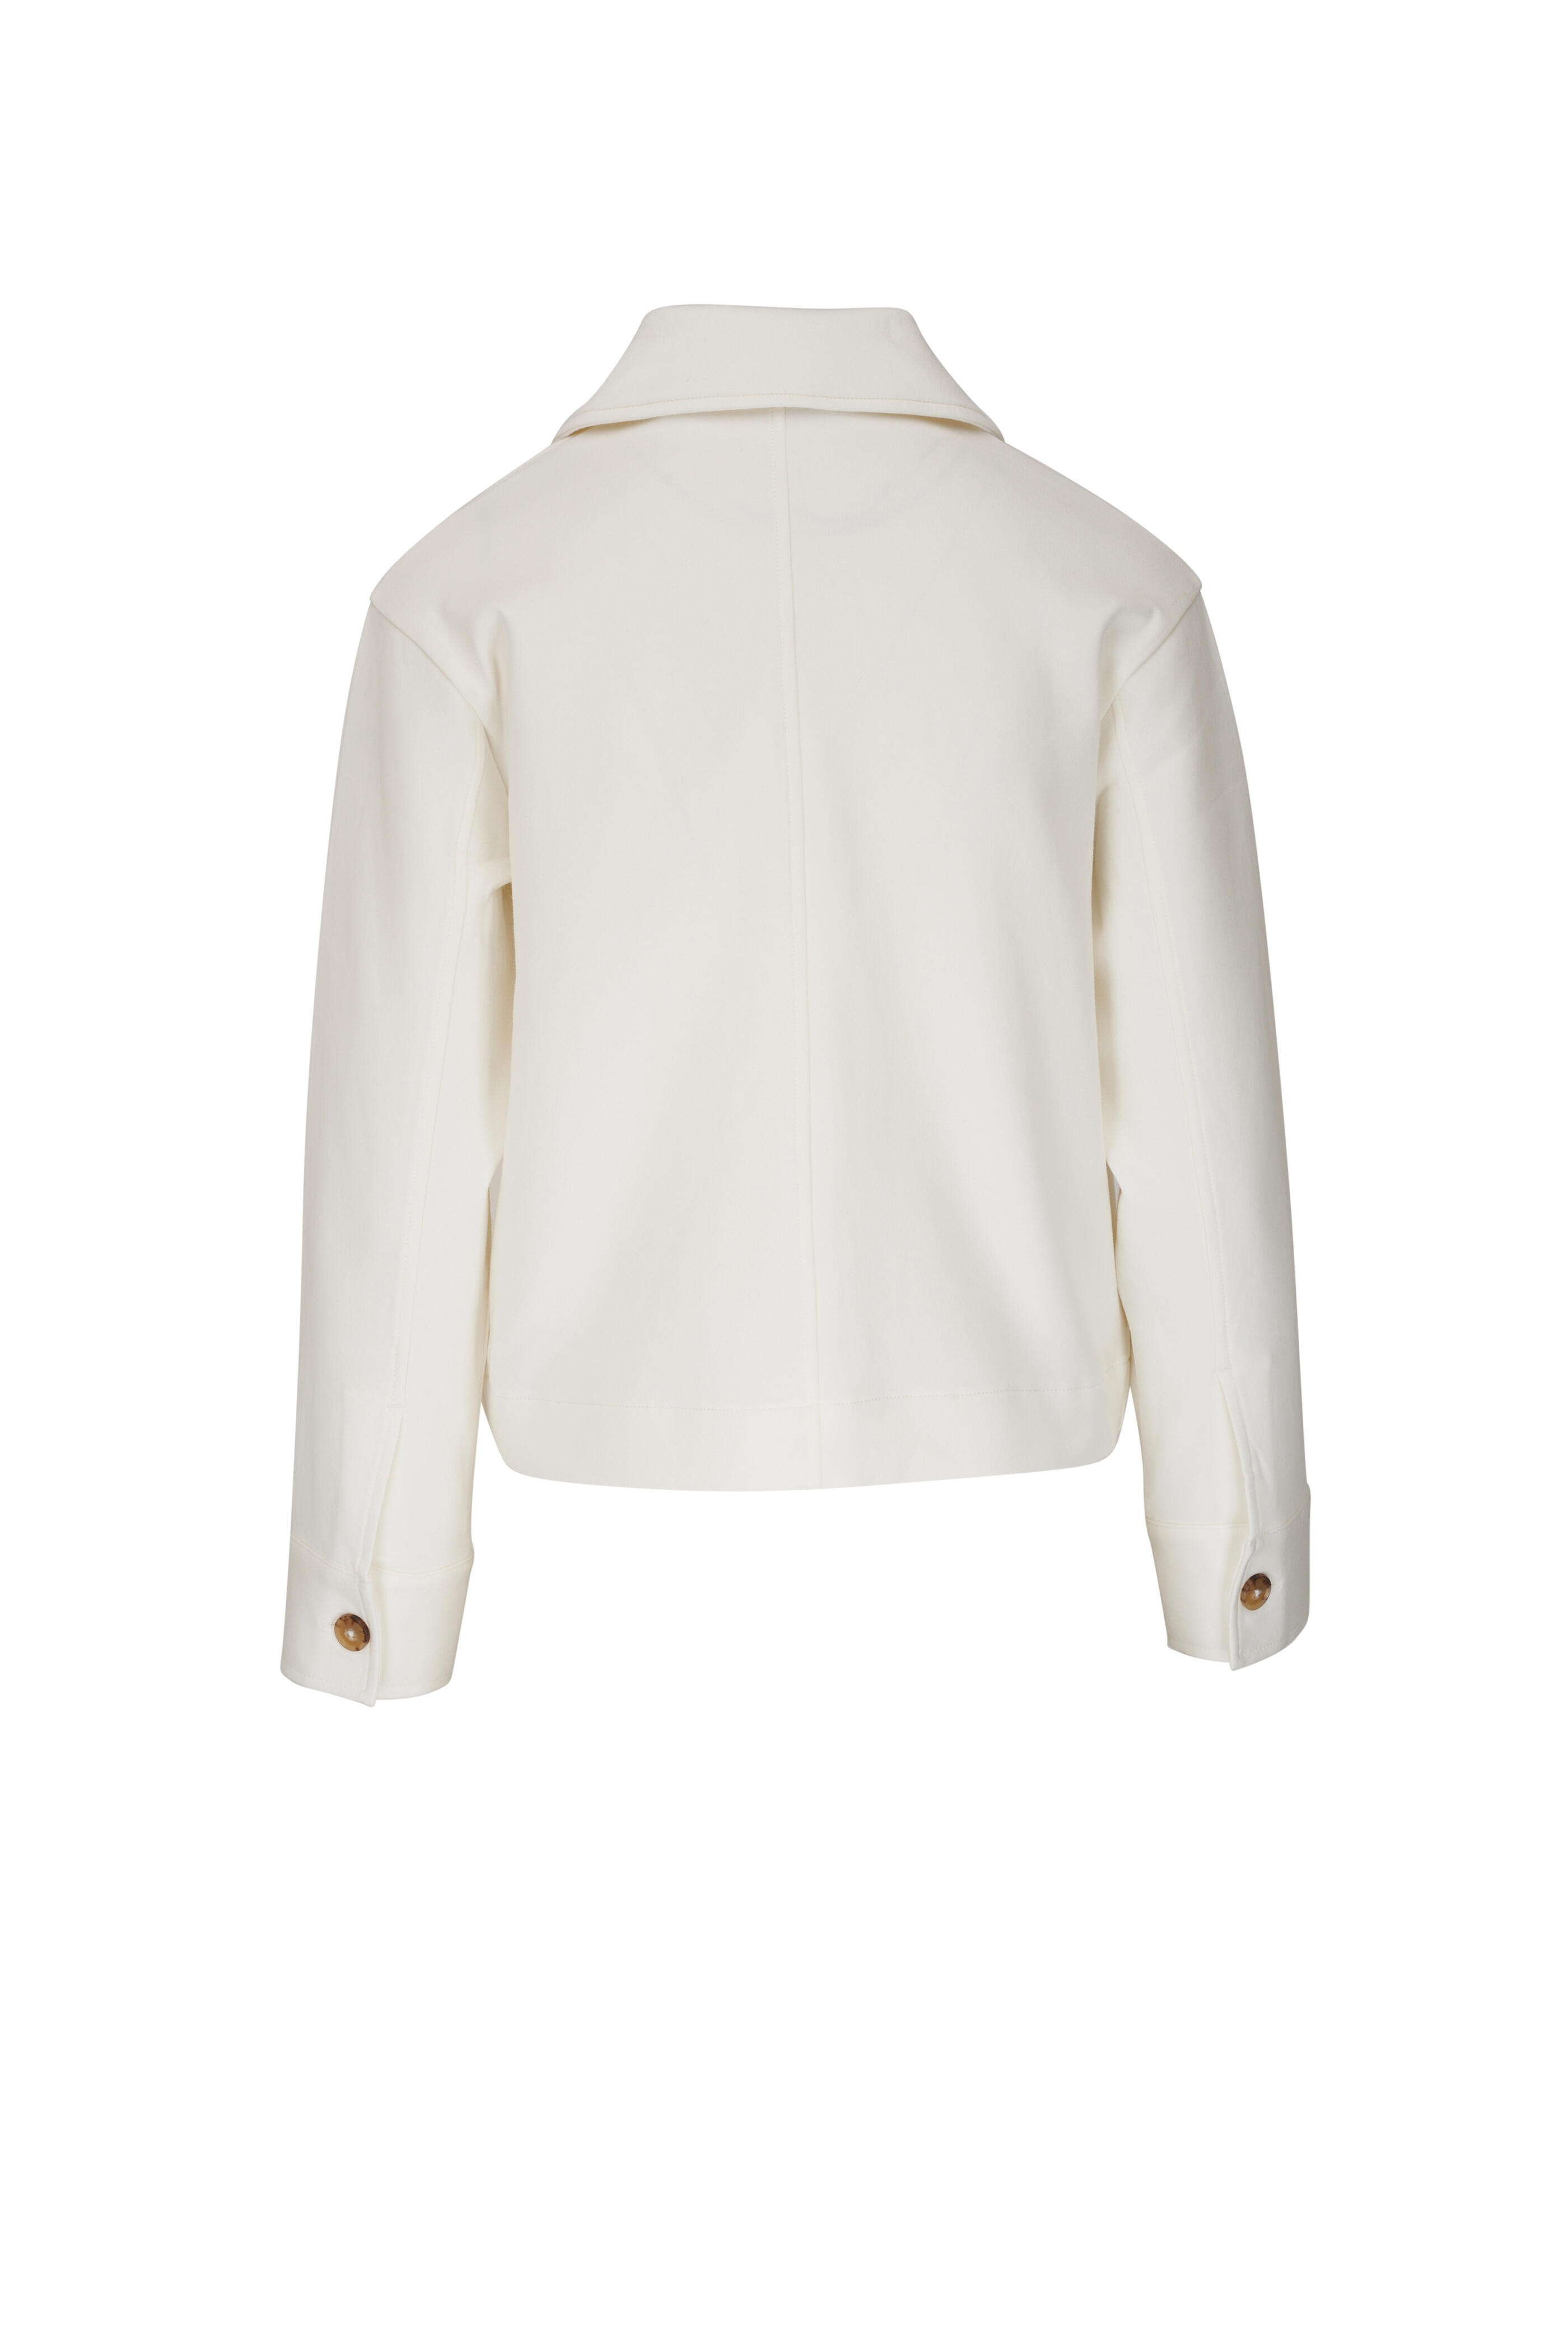 Vince - Off White Zip Up Collared Jacket | Mitchell Stores